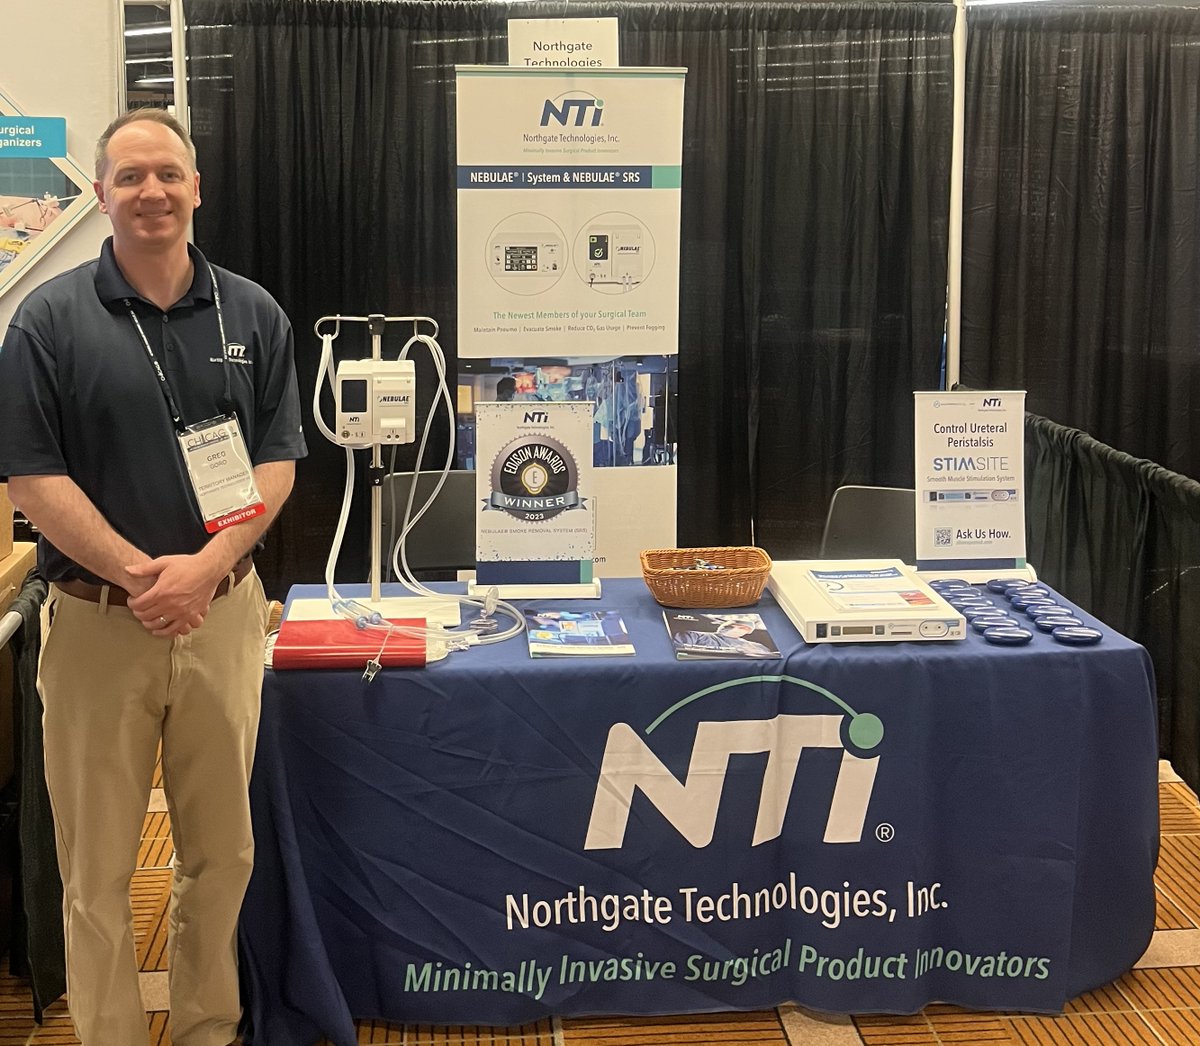 If you are attending the AST Surgical Technology Conference in #chicago 🏙 this week, stop by the NTI Booth #414 to say hello to our team and meet our line of #innovative products! #laparoscopicsurgery #medicaldevices #surgicalsmoke #smokefreeOR #minimallyinvasivesurgery